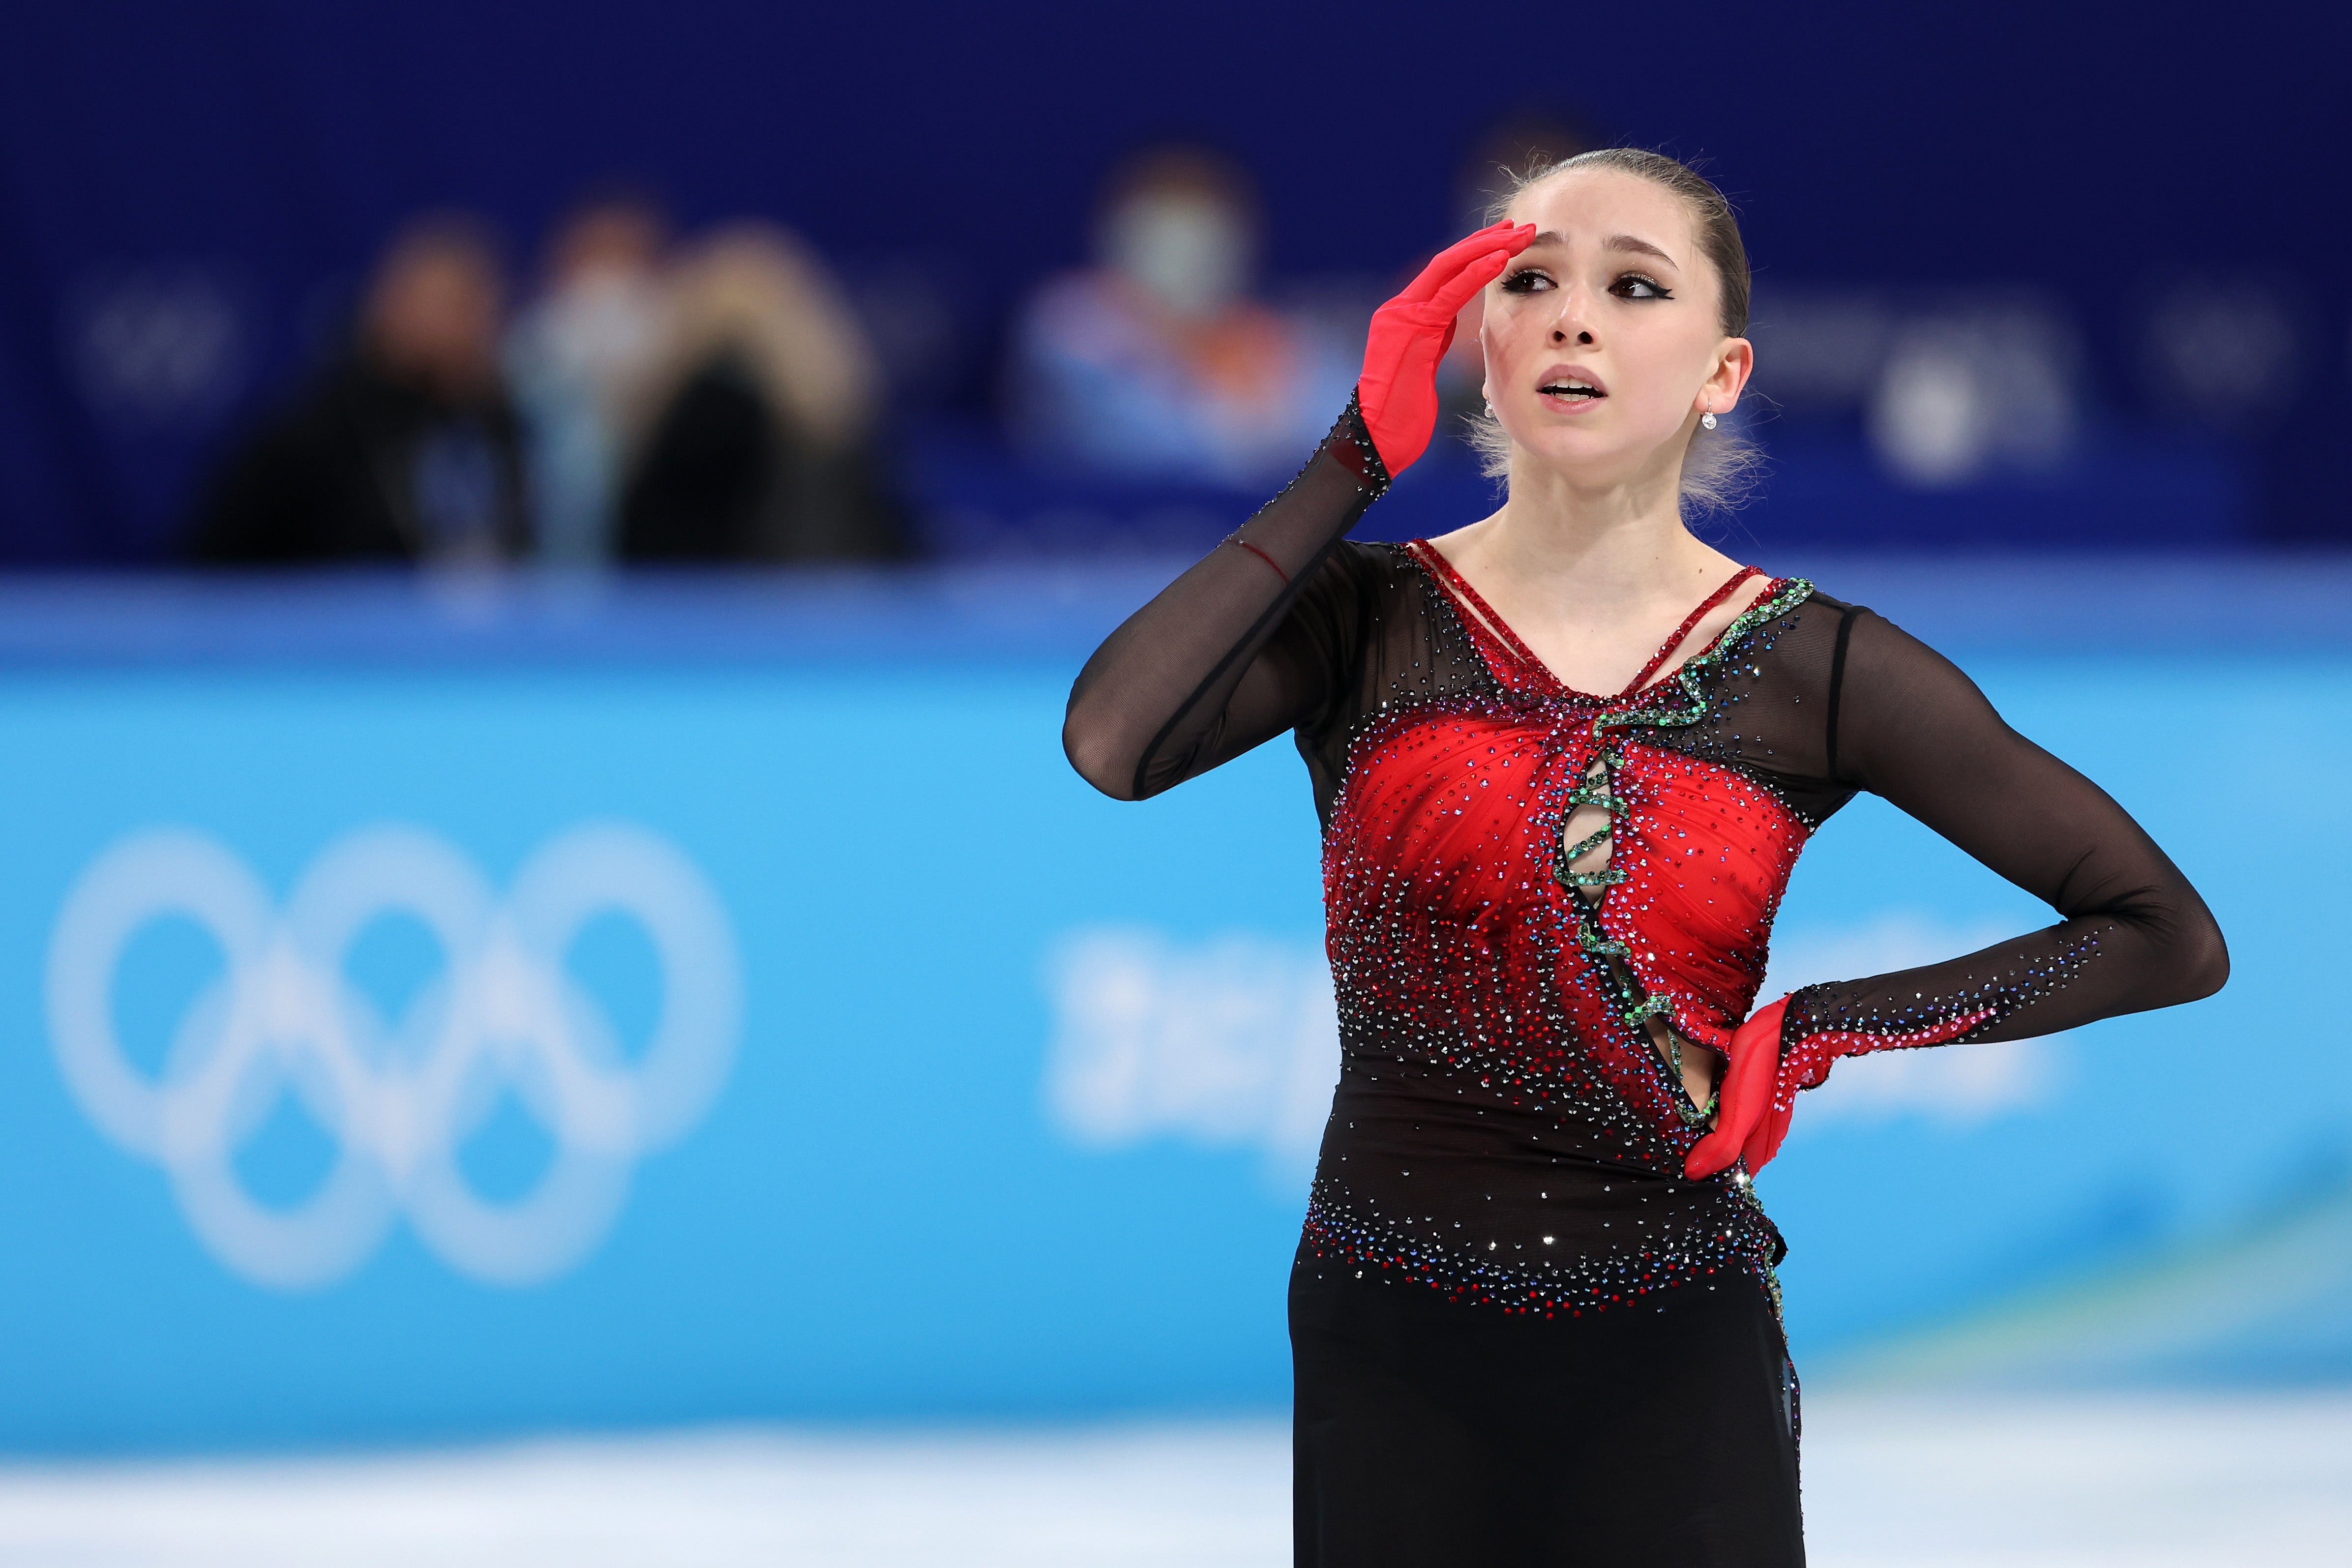 Kamila Valieva is in the eye of a doping storm at the Winter Olympics